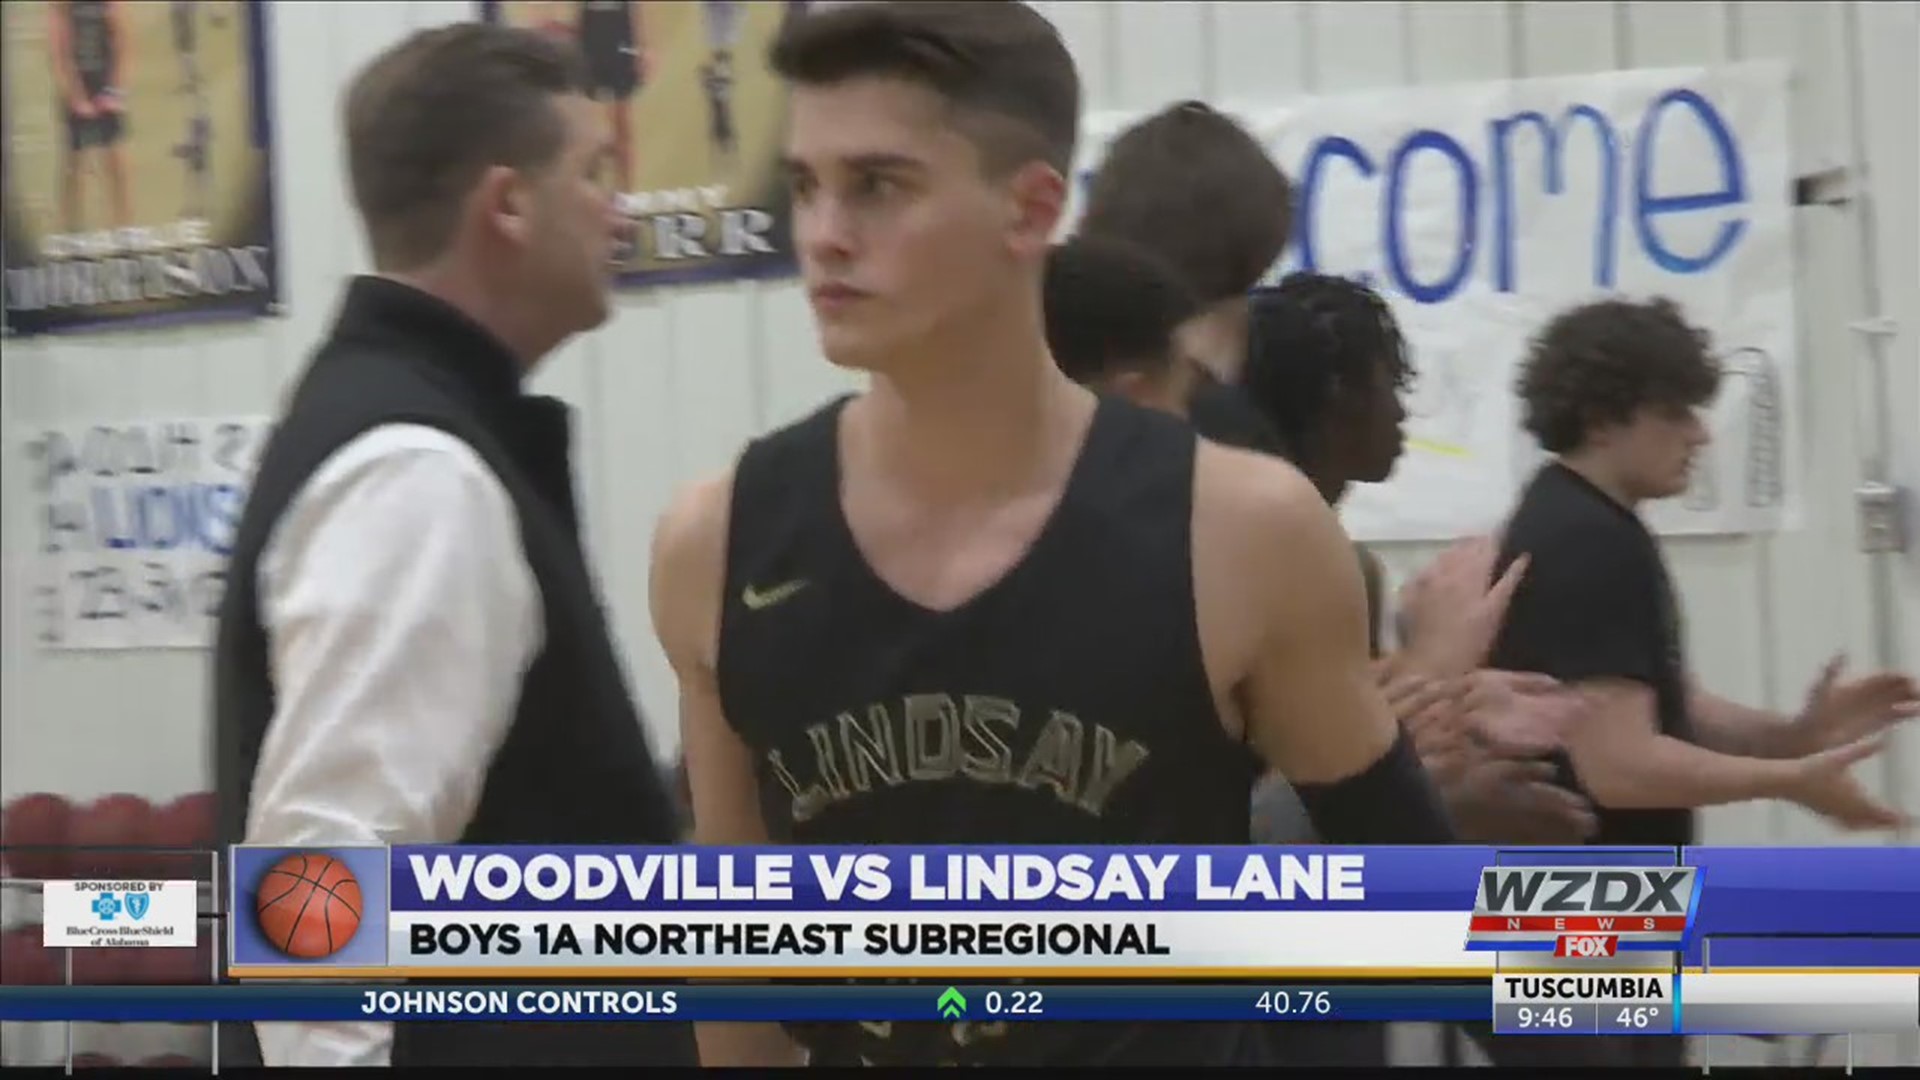 Tonight, several teams in the Tennessee Valley tried to punch their ticket to their respective AHSAA Regional semifinal.
Tommy Murr and Lindsay Lane advanced by defeating Woodville, 63-47.Austin Harvell and East Limestone are heading to their respective regionals by defeating Russellville, 57-46.